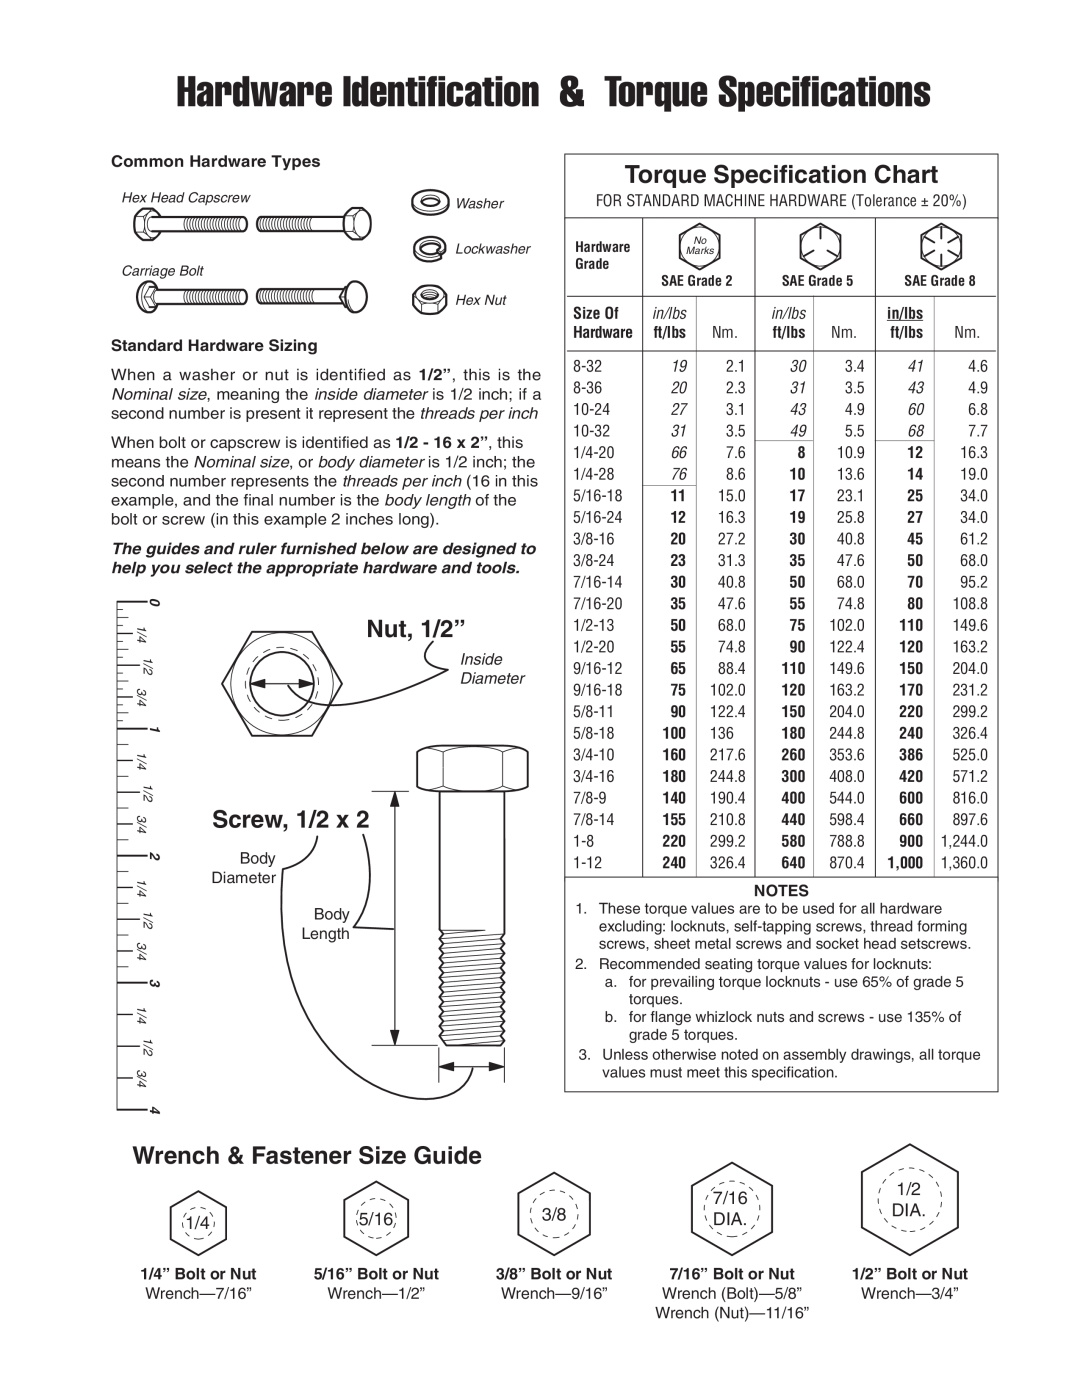 Snapper 1726564 manual Torque Specification Chart, Hardware Identification & Torque Specifications, Nut, 1/2”, Screw, 1/2 